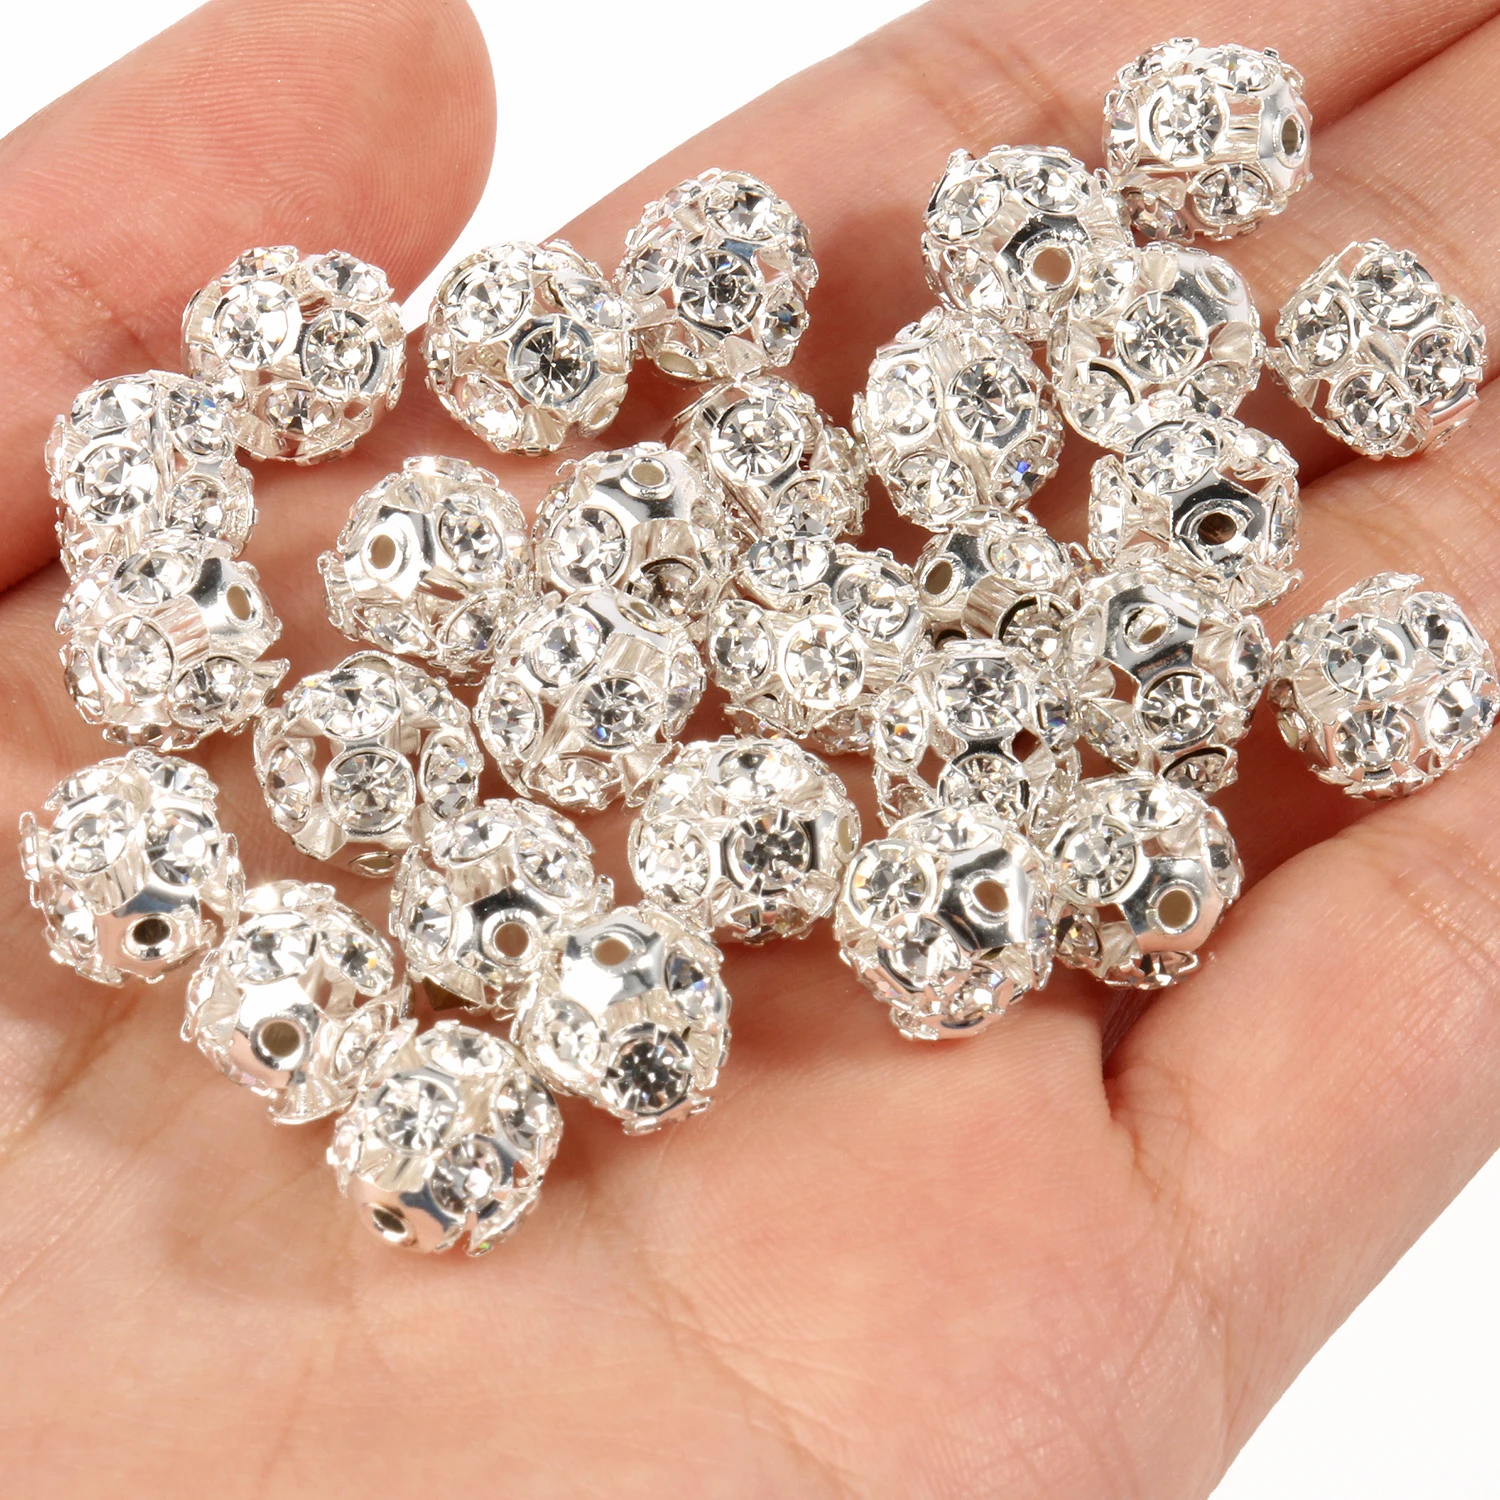 50pc/Lot 6mm 8mm 10mm AB Color  Rhinestone Ball Shape Loose Beads Metal Crystal Beads for Jewelry Making DIY Accessories